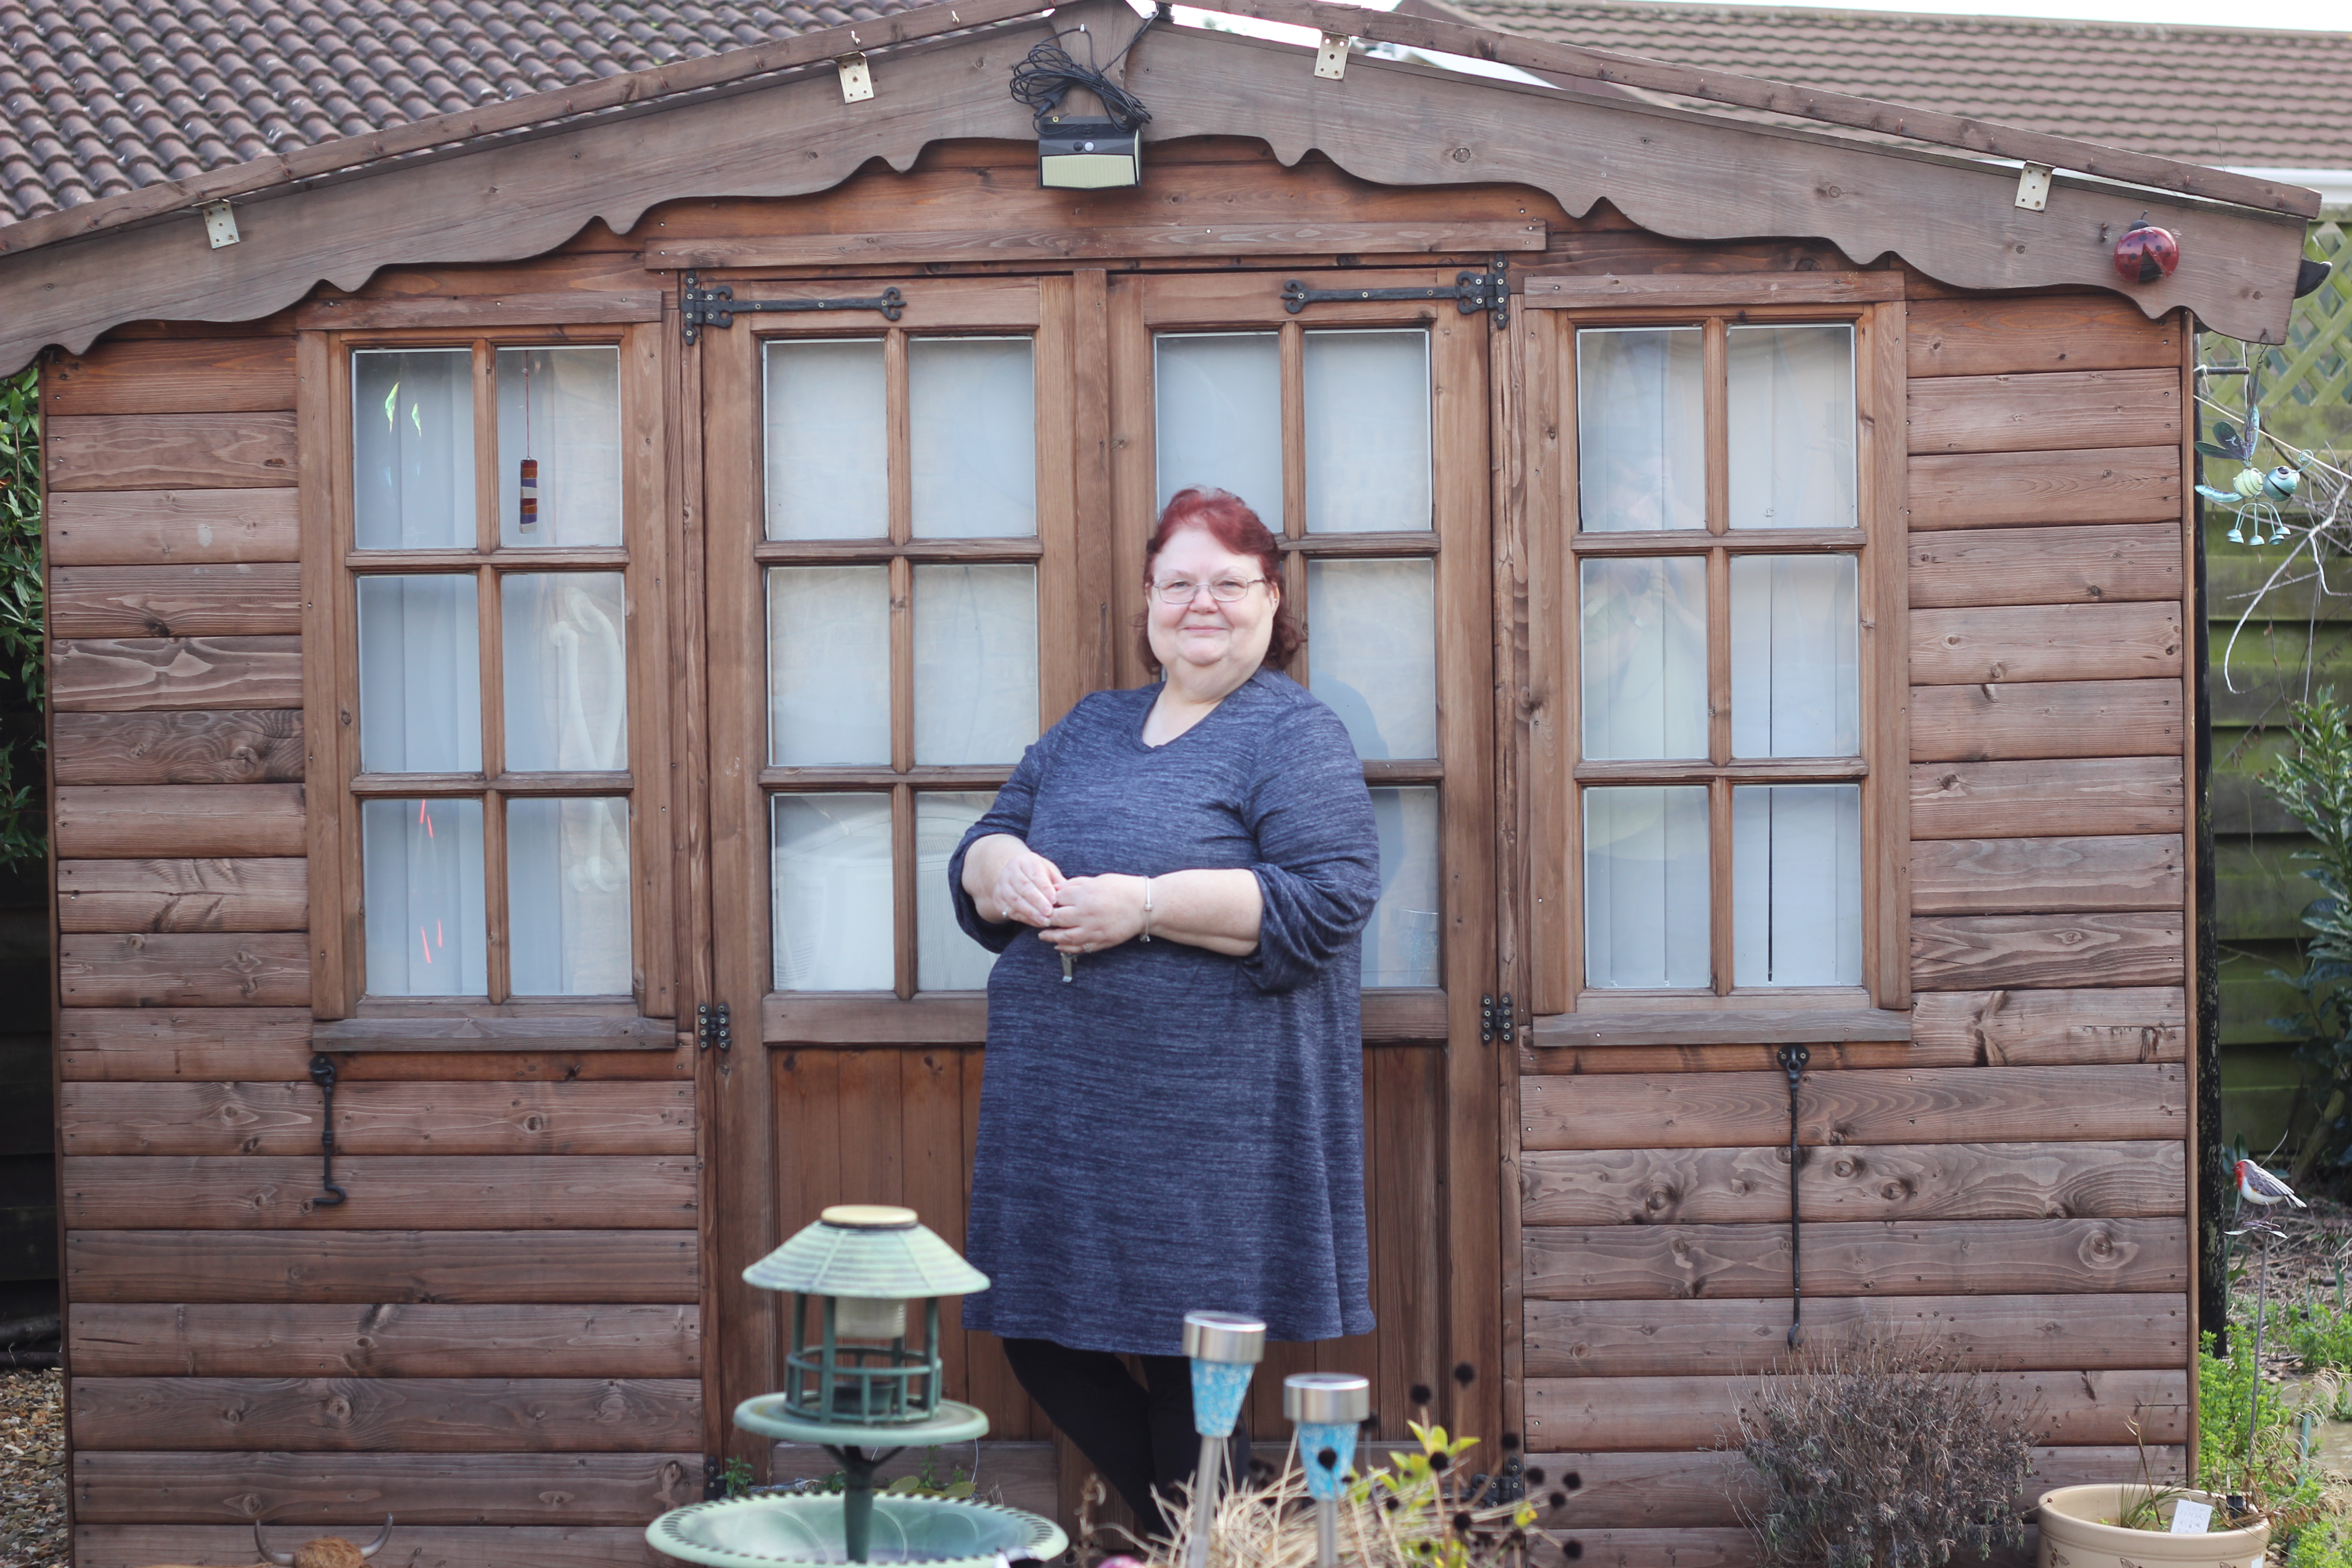 Angie smiles as she poses outside of her office shed